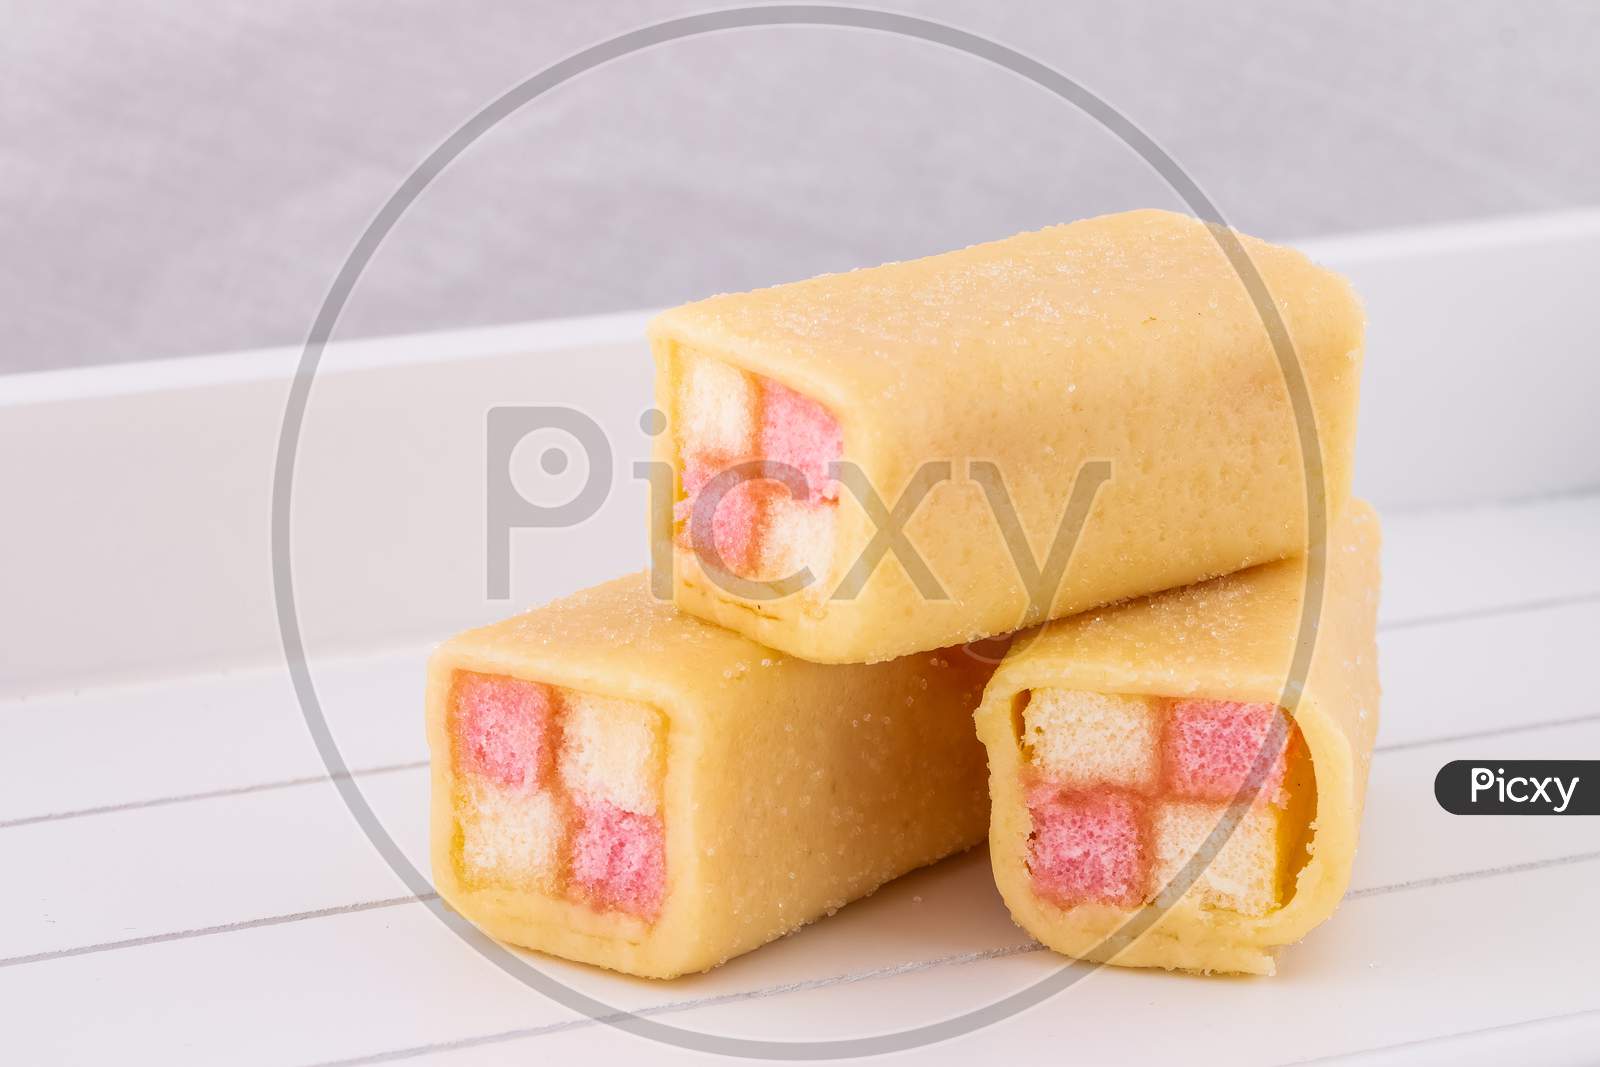 Delicious Mini Battenberg Cake, The Tradional Sweet Afternoon Tea Snack. Pink And Yellow Sponge Cake Covered In Jam Wrapped In Almond Marzipan.